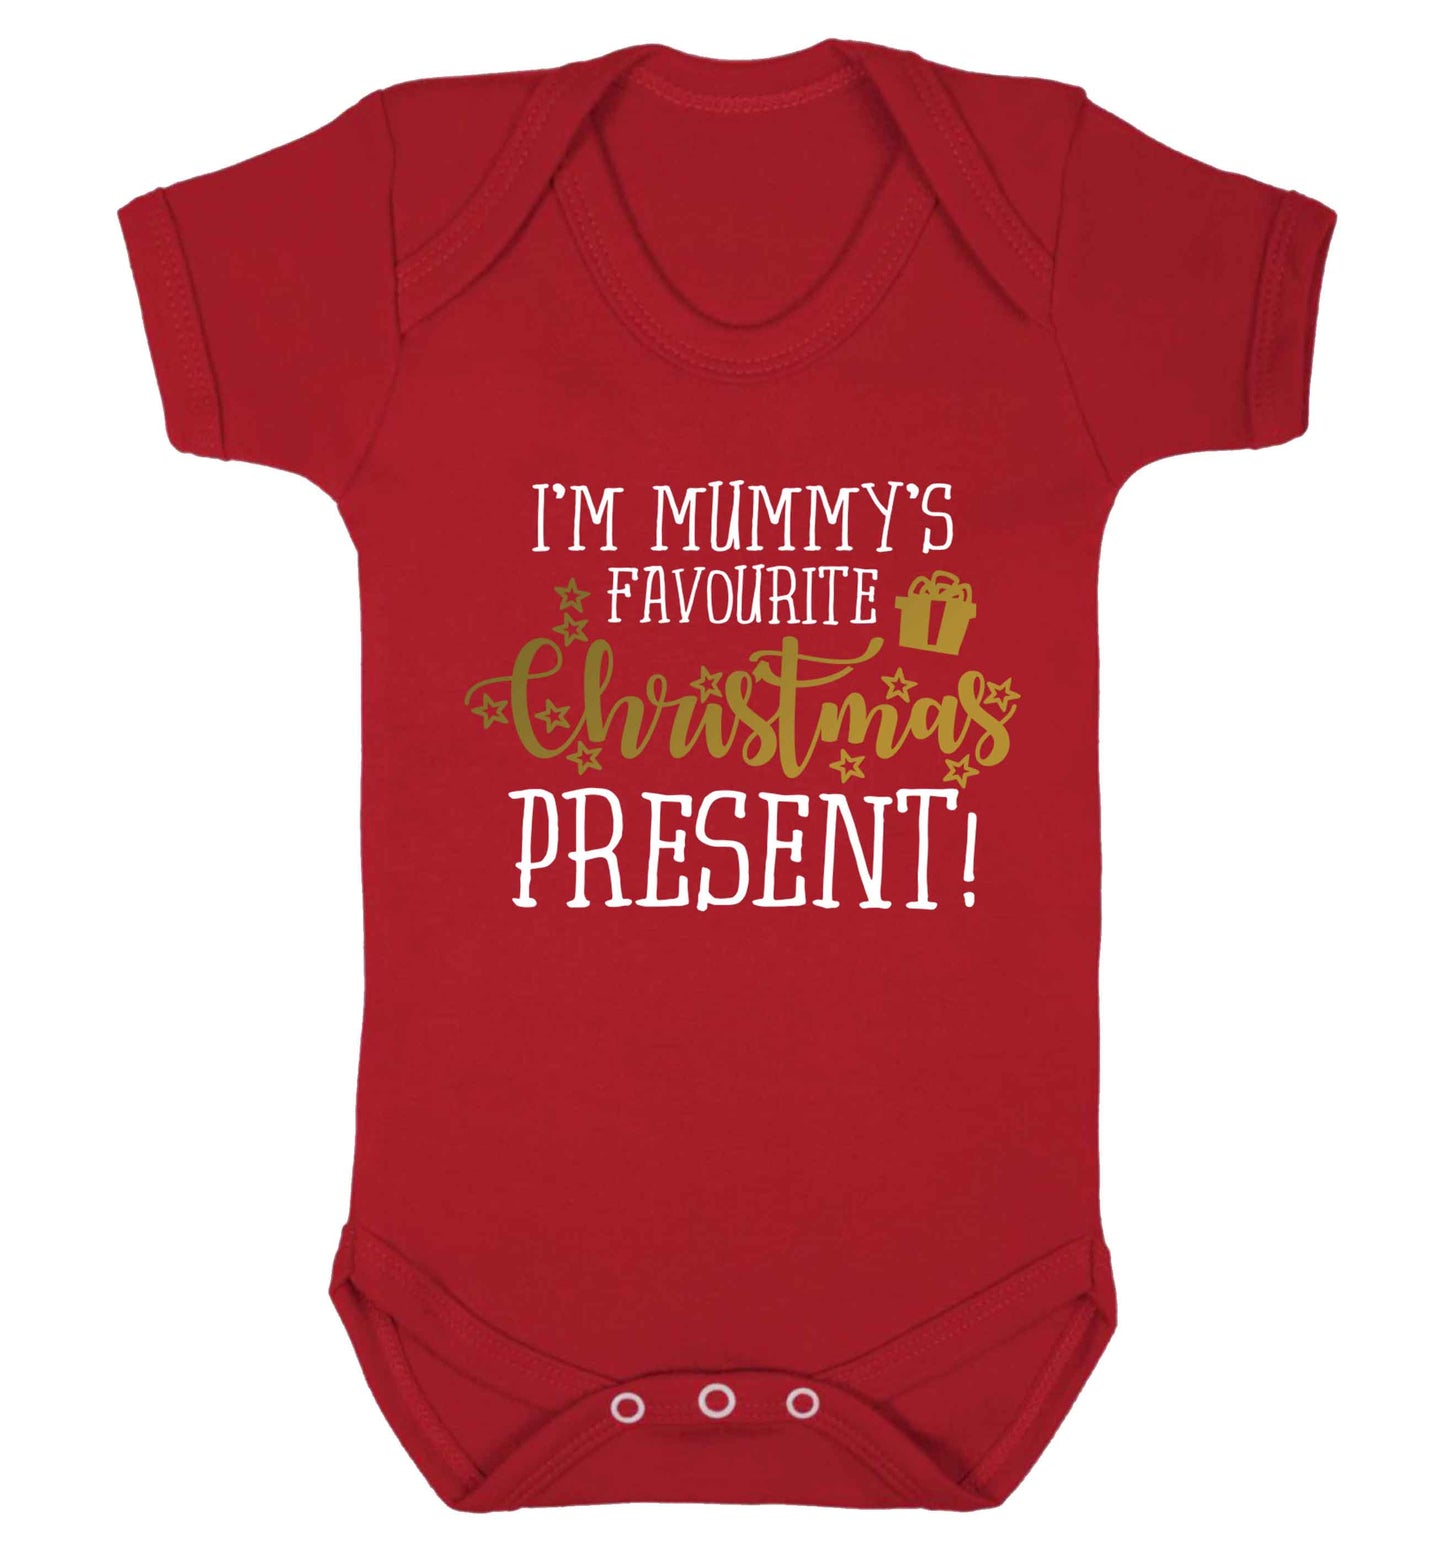 I'm Mummy's favourite Christmas present Baby Vest red 18-24 months